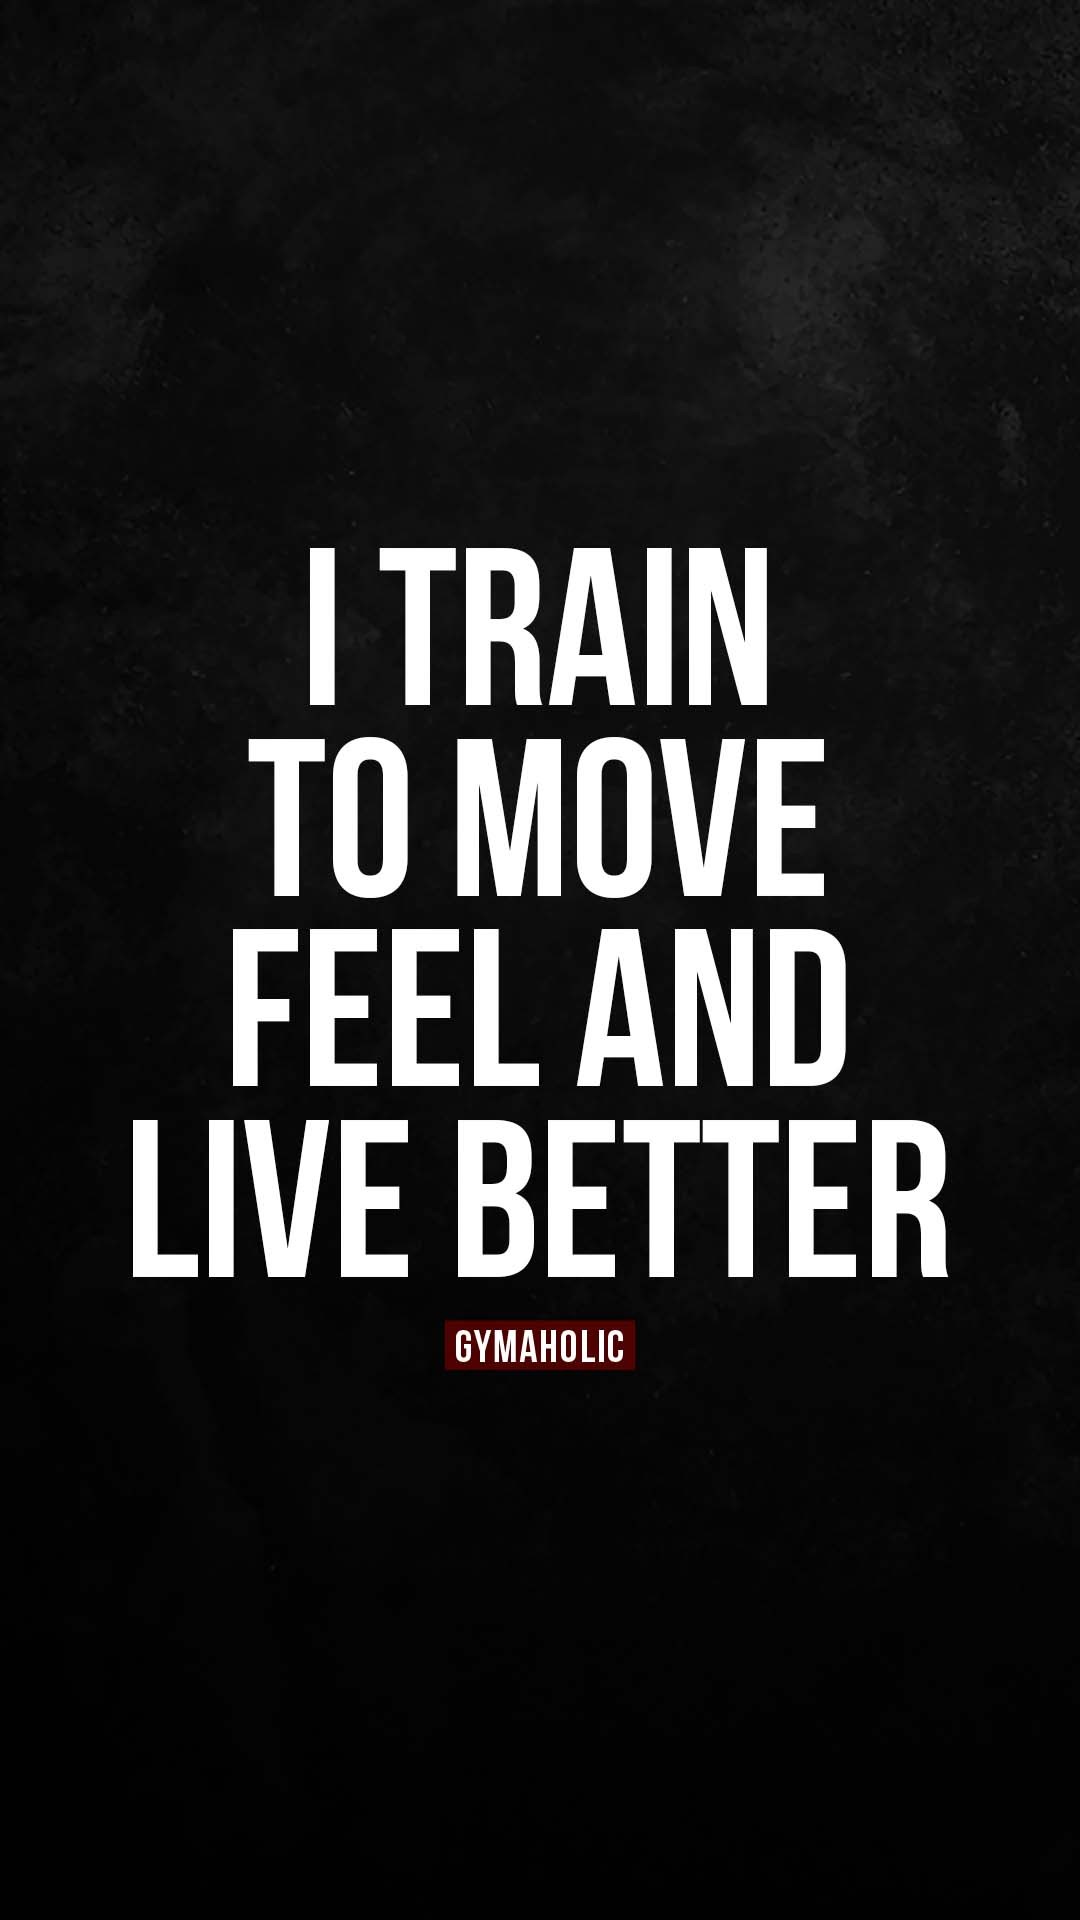 I train to move, feel and live better.